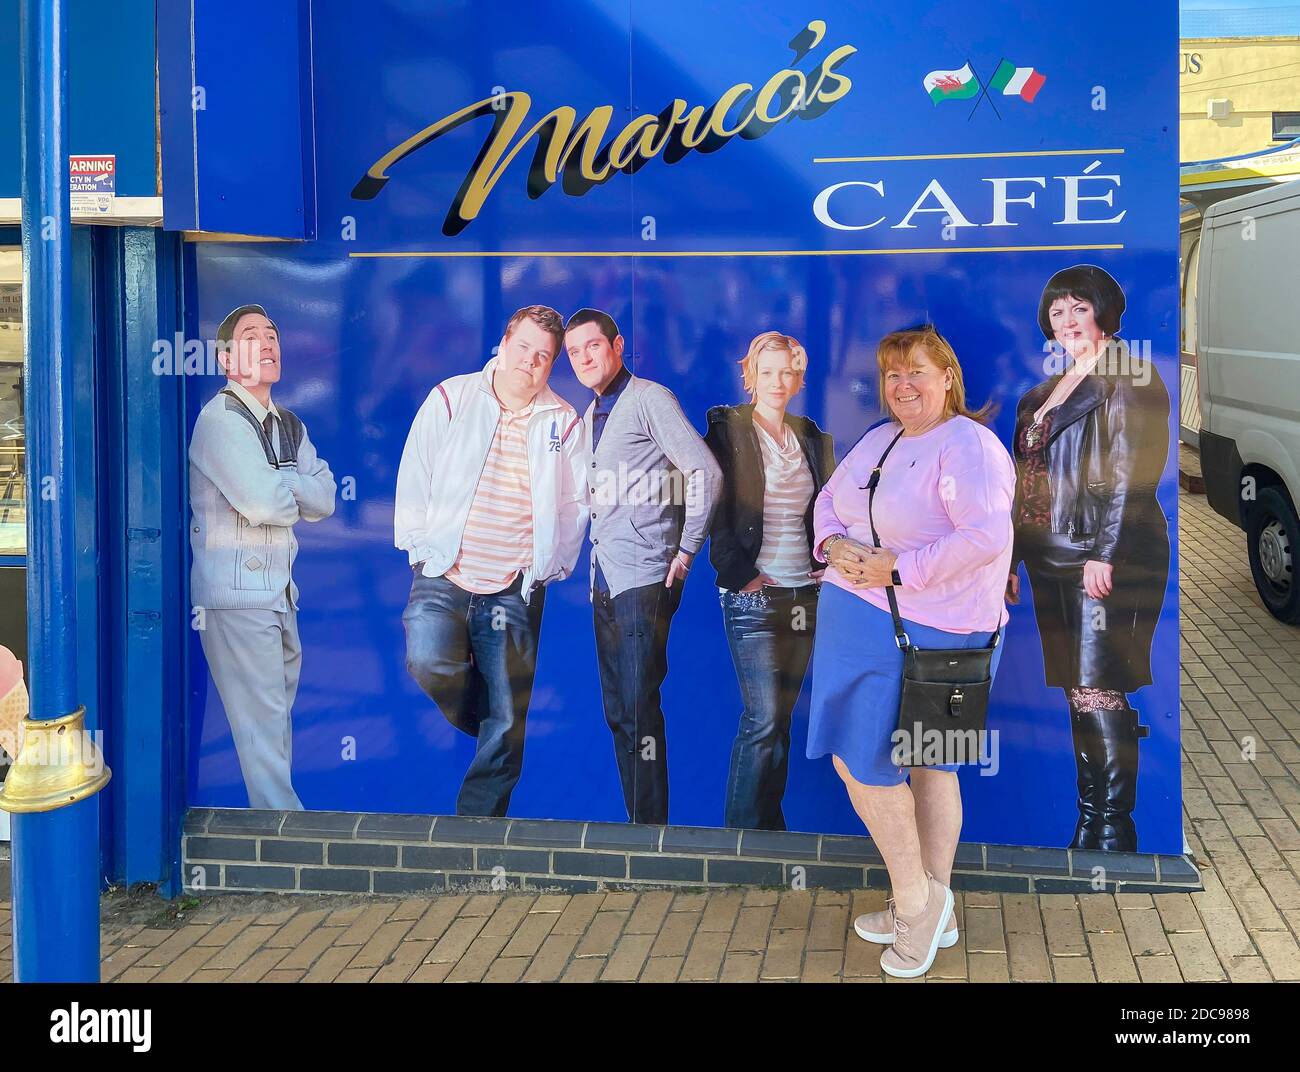 Tourist by Marco's Cafe sign (dans le sitcom 'Gavin & Stacey'), Barry Island, Vale of Glamorgan, pays de Galles (Cymru), Royaume-Uni Banque D'Images